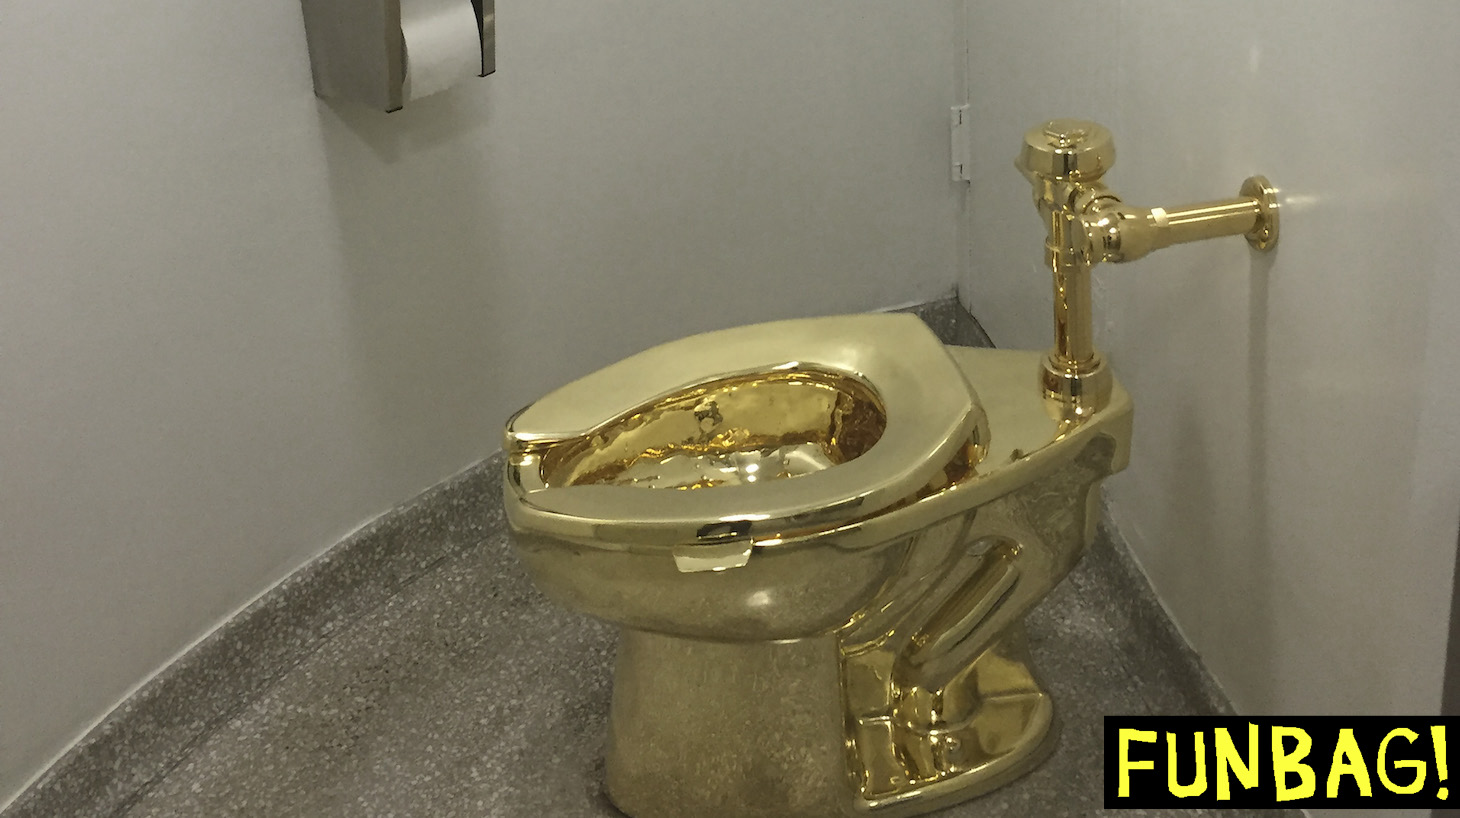 A fully functioning solid gold toilet, made by Italian artist Maurizio Cattelan, is going into public use at the Guggenheim Museum in New York on September 15, 2016. - A guard will be stationed outside the bathroom to protect the work, entitled 'America', which recalls Marcel Duchamp's famous work, 'Fountain'. (Photo by William EDWARDS / AFP) (Photo by WILLIAM EDWARDS/AFP via Getty Images)